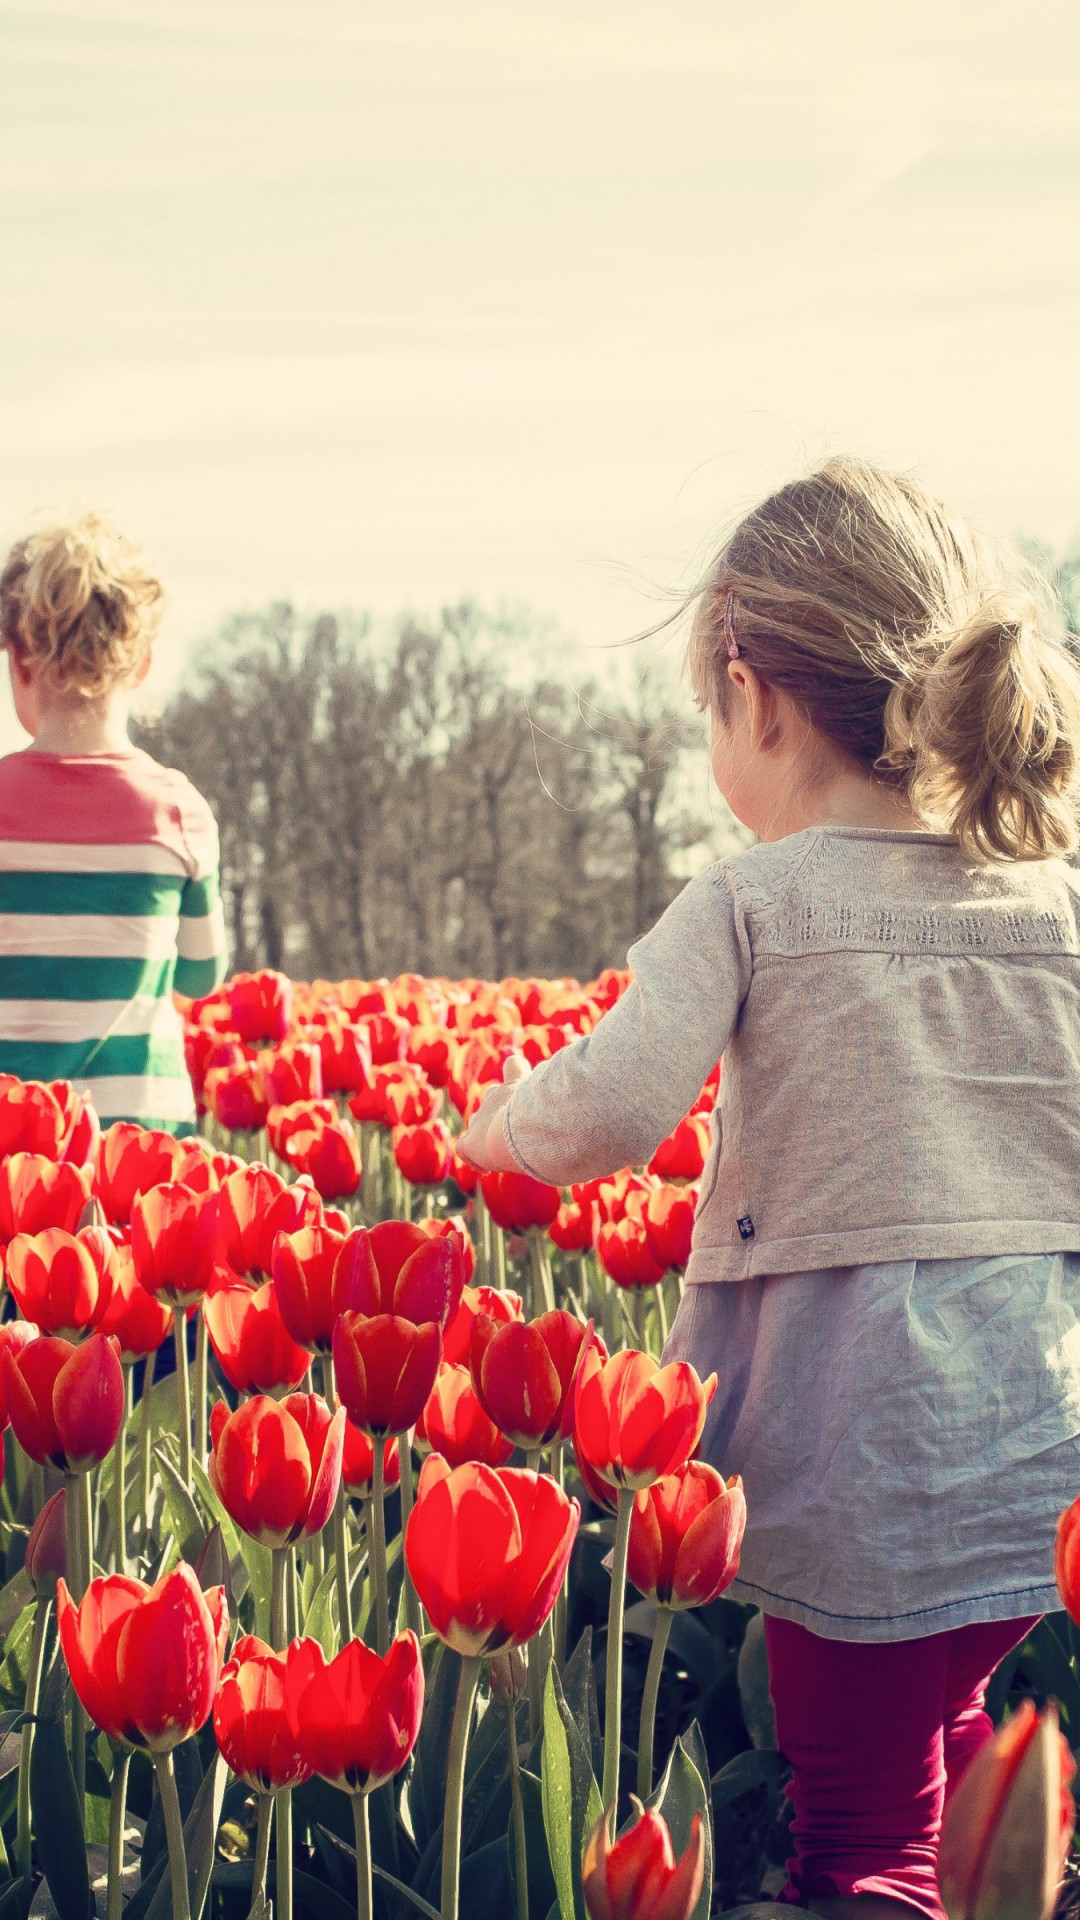 Children in the land with tulips wallpaper 1080x1920